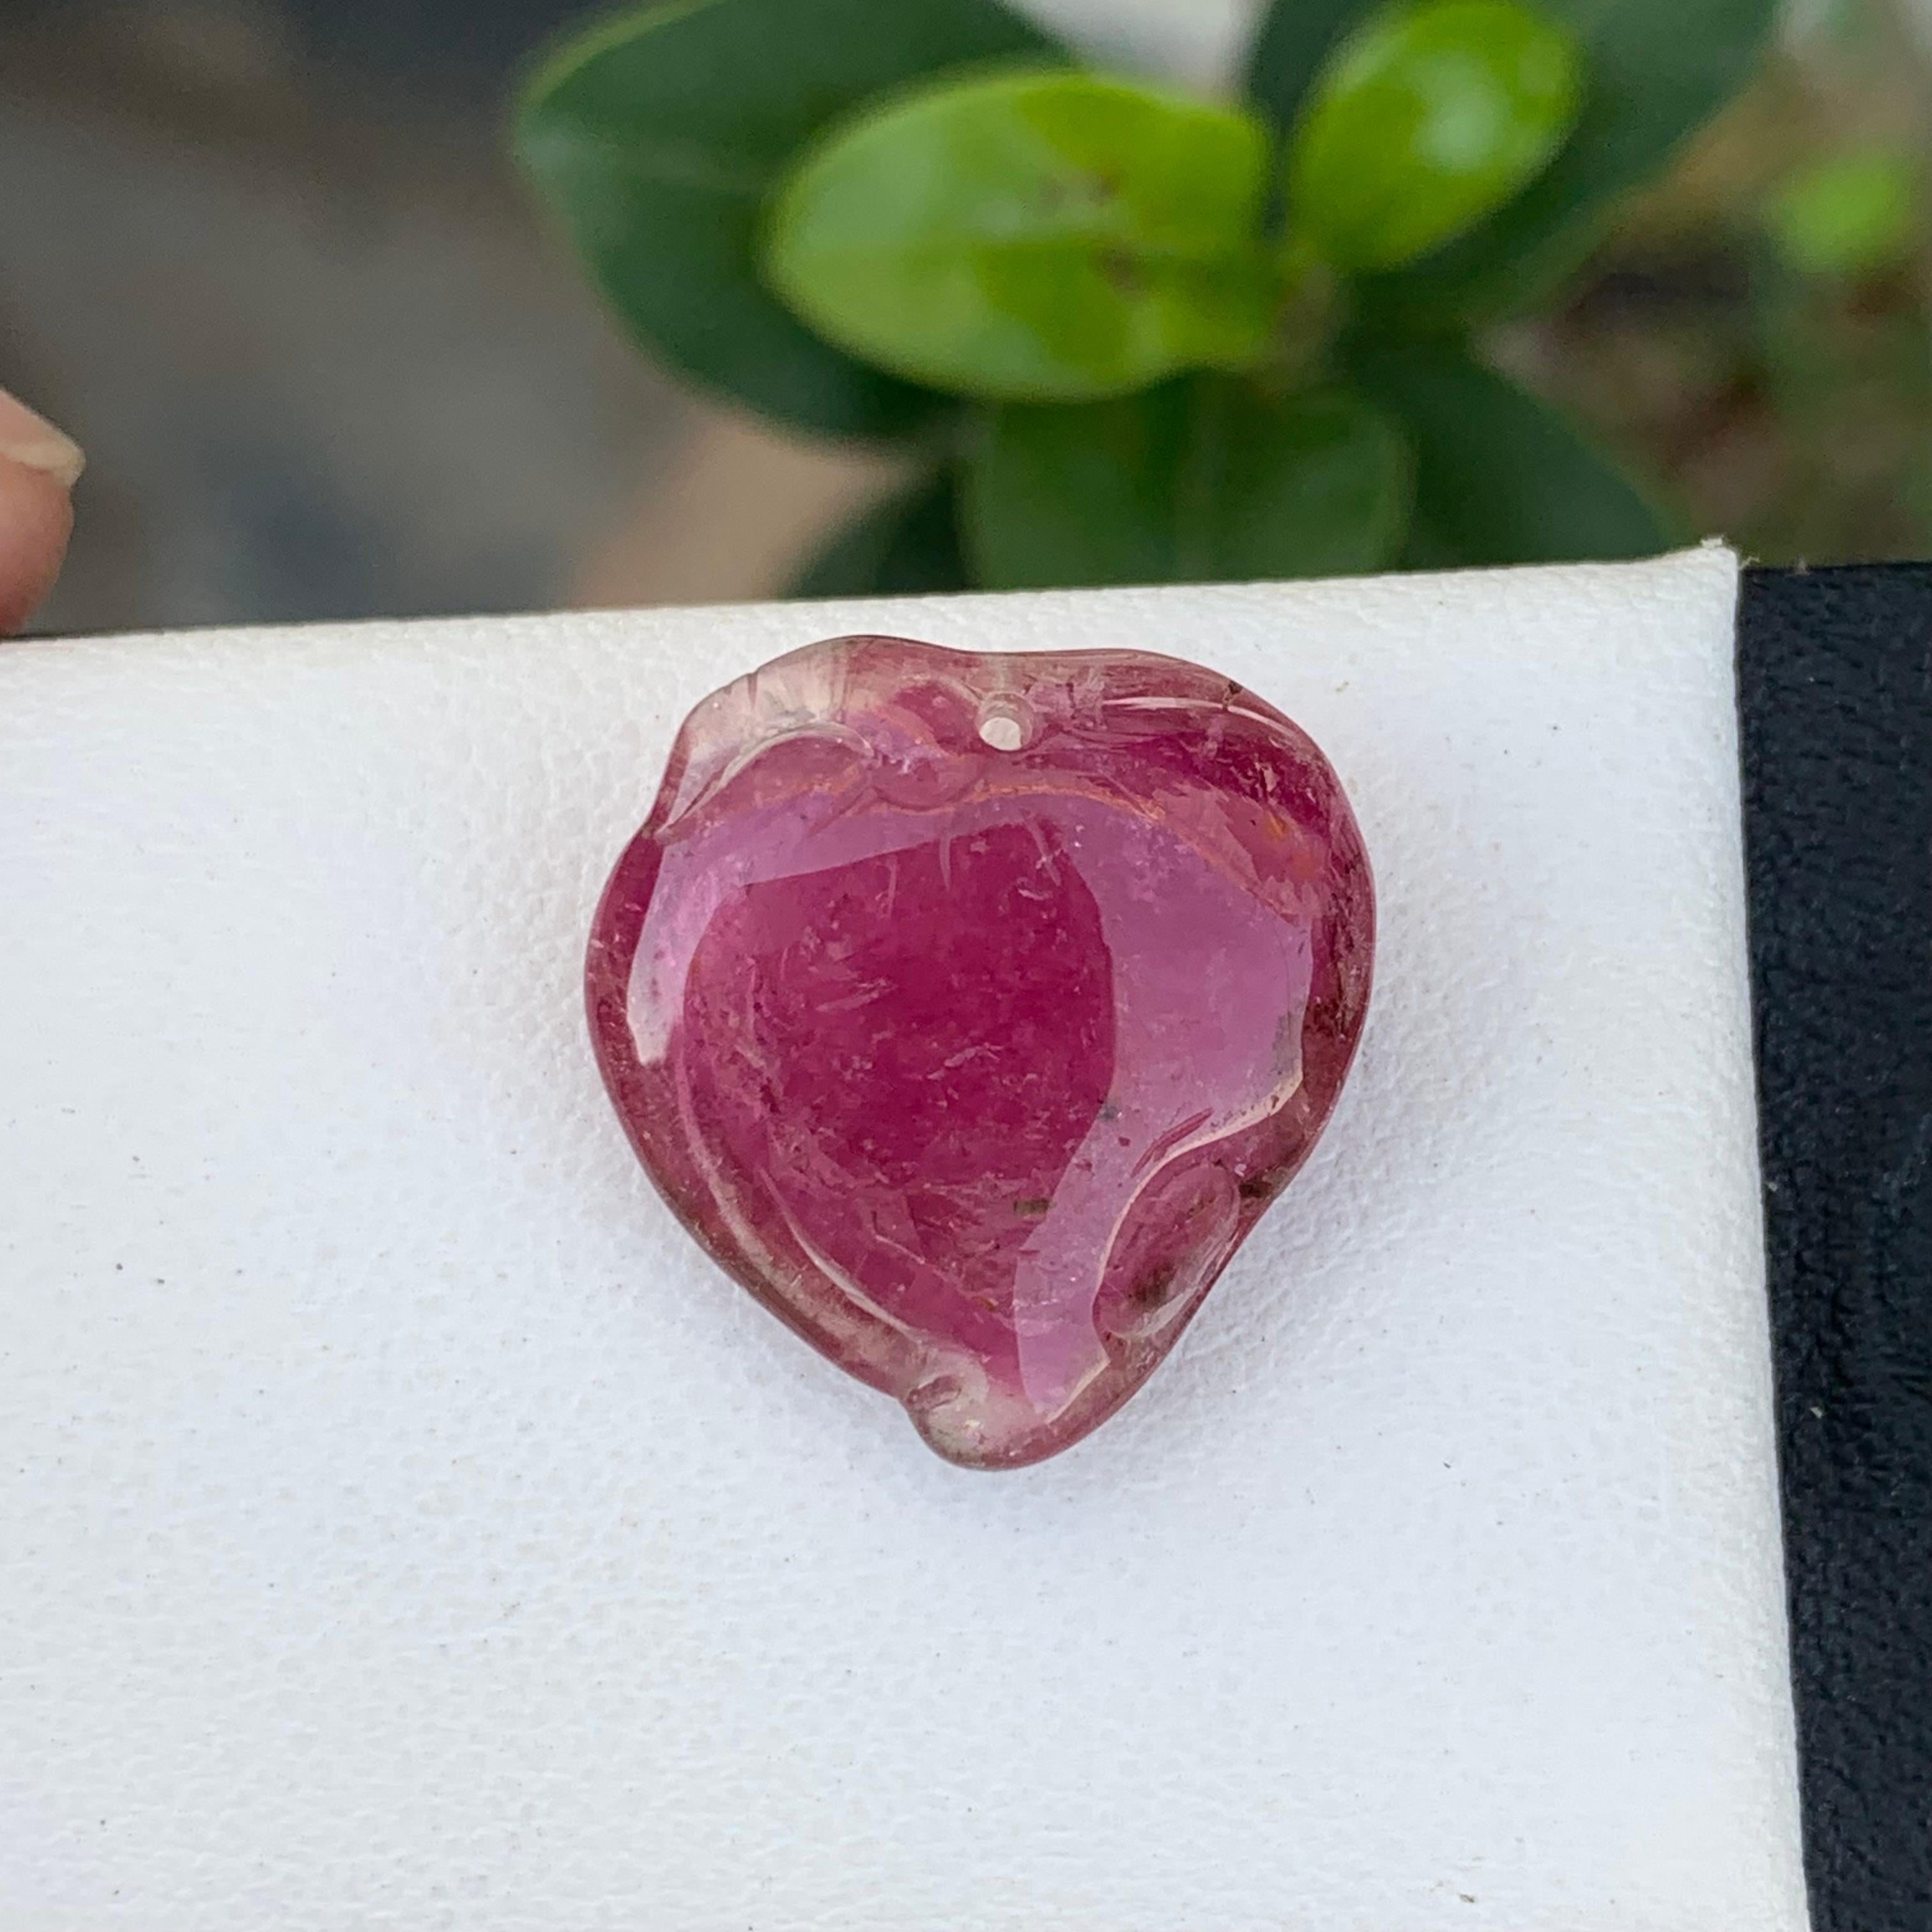 18th Century and Earlier 14.65 Carat Loose Heart Shape Tourmaline Drilled Carving from Africa For Sale